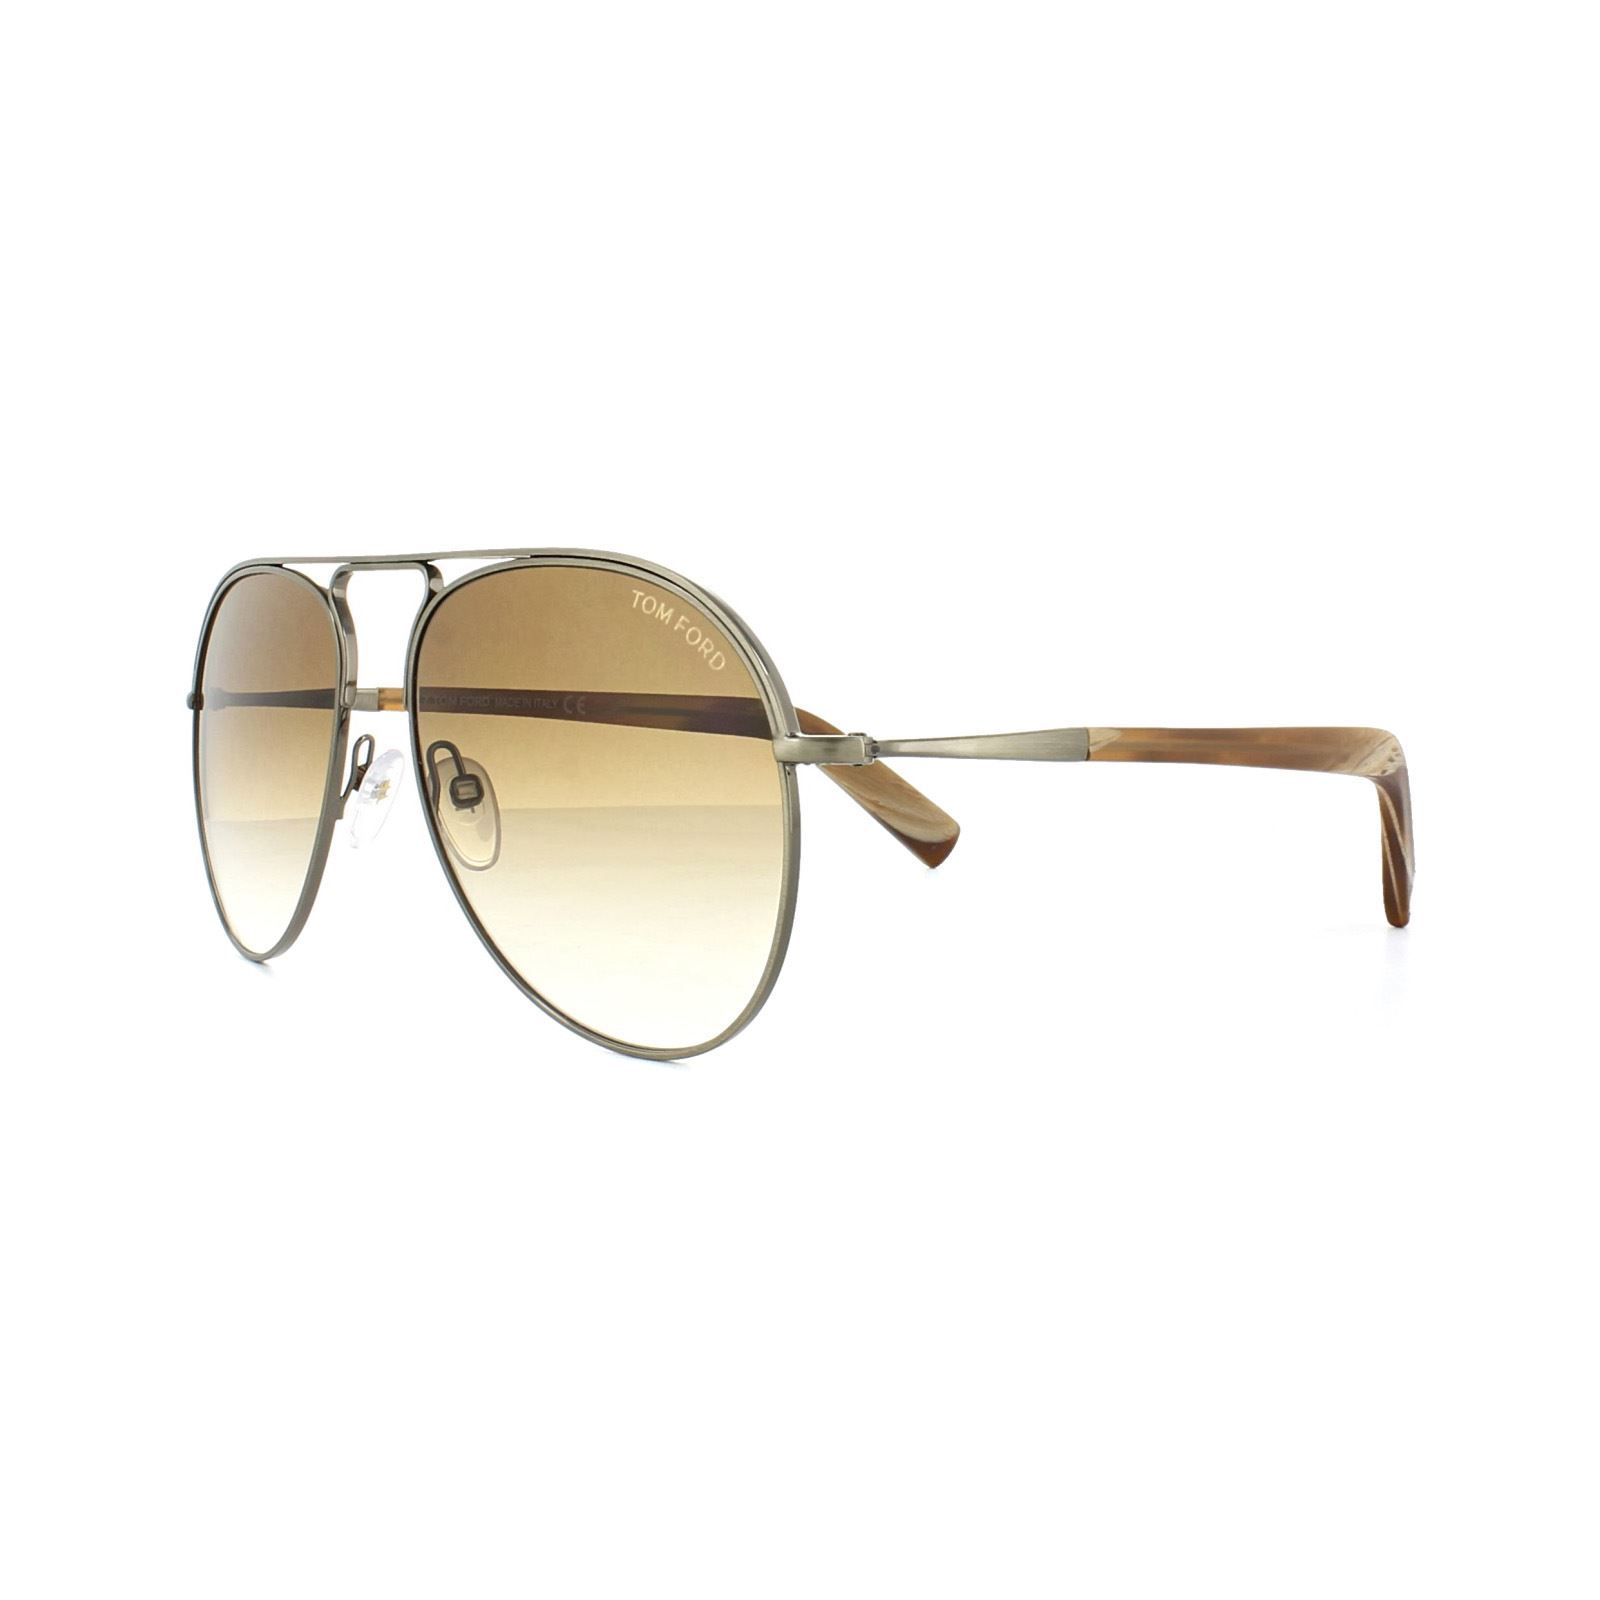 Tom Ford Sunglasses 0448 Cody 33F Gold Brown Gradient are a superb modern version of the iconic aviator style with the unusual raised double bridge and nicely tapered plastic arms for a comfortable secure fit.